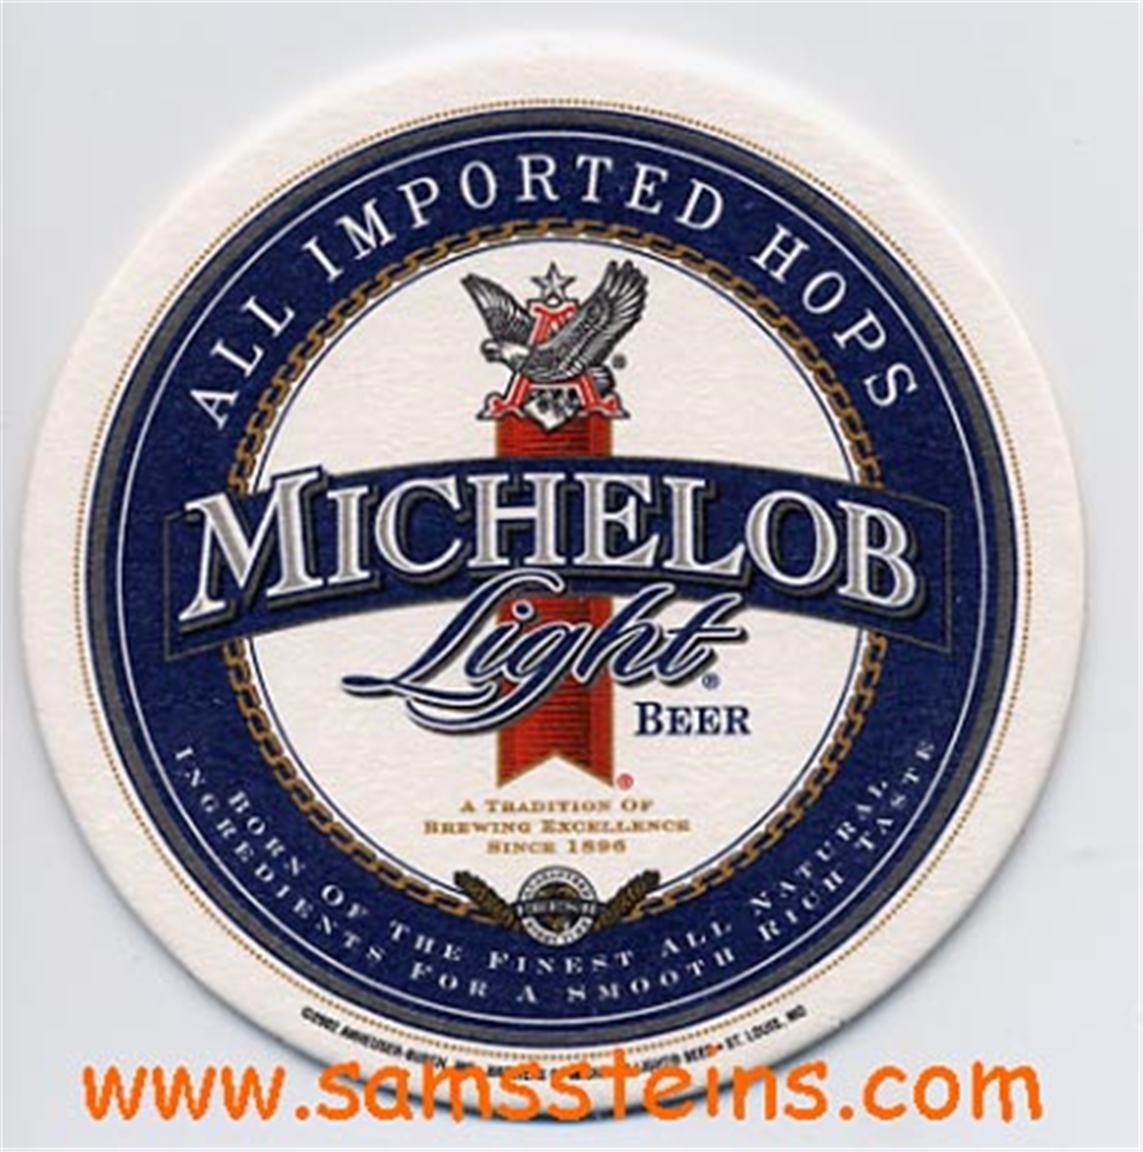 Michelob Light A&Eagle Round Beer Coaster